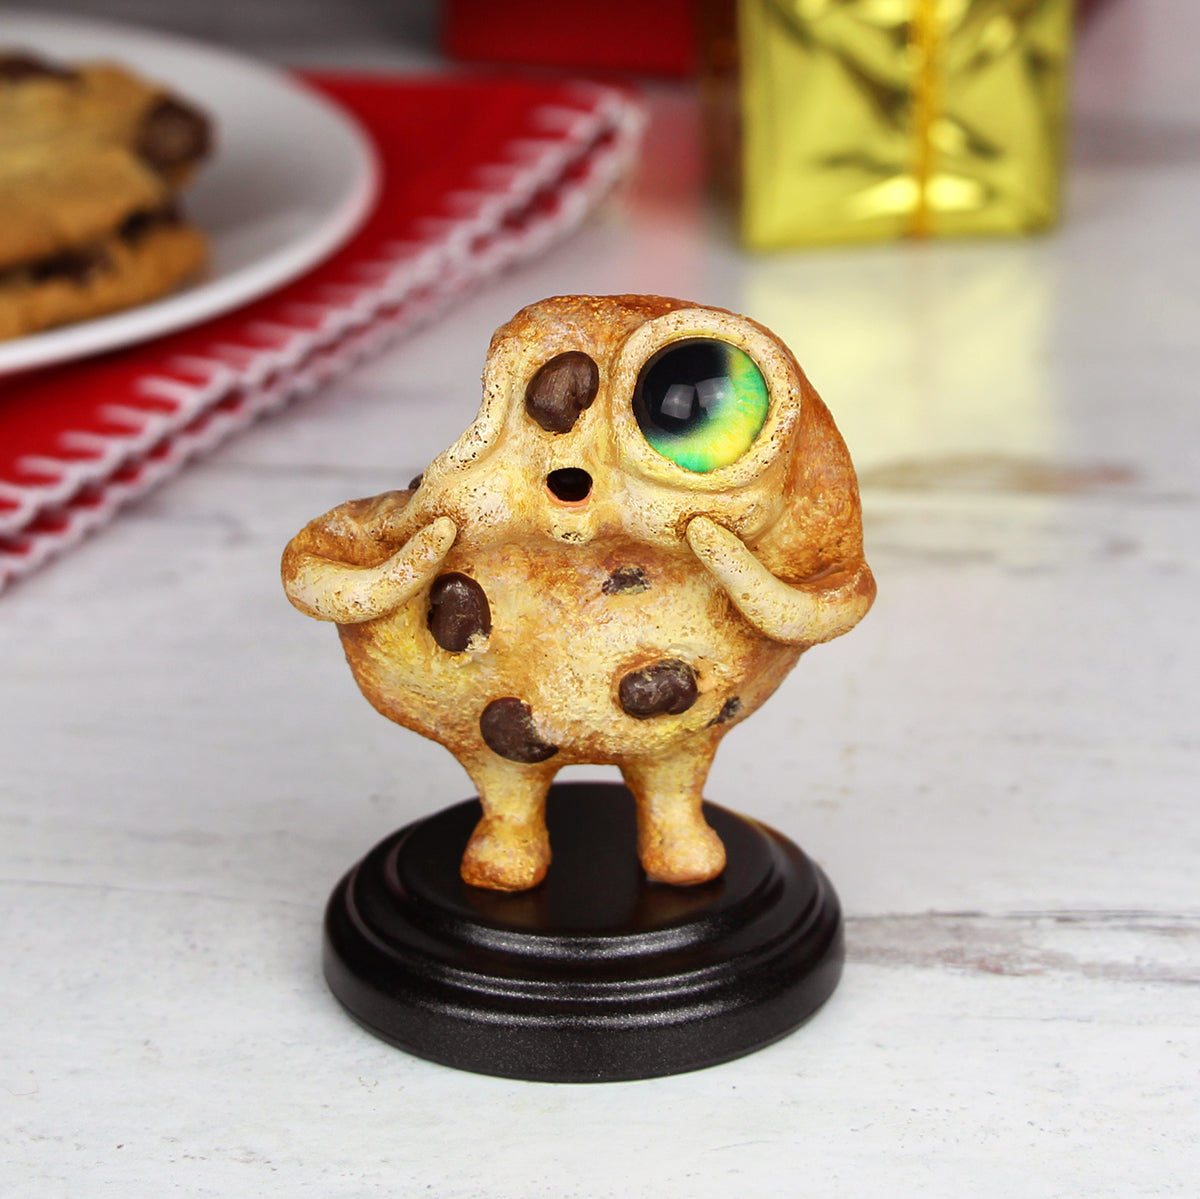 Chip the Enchanted Chocolate Chip Cookie